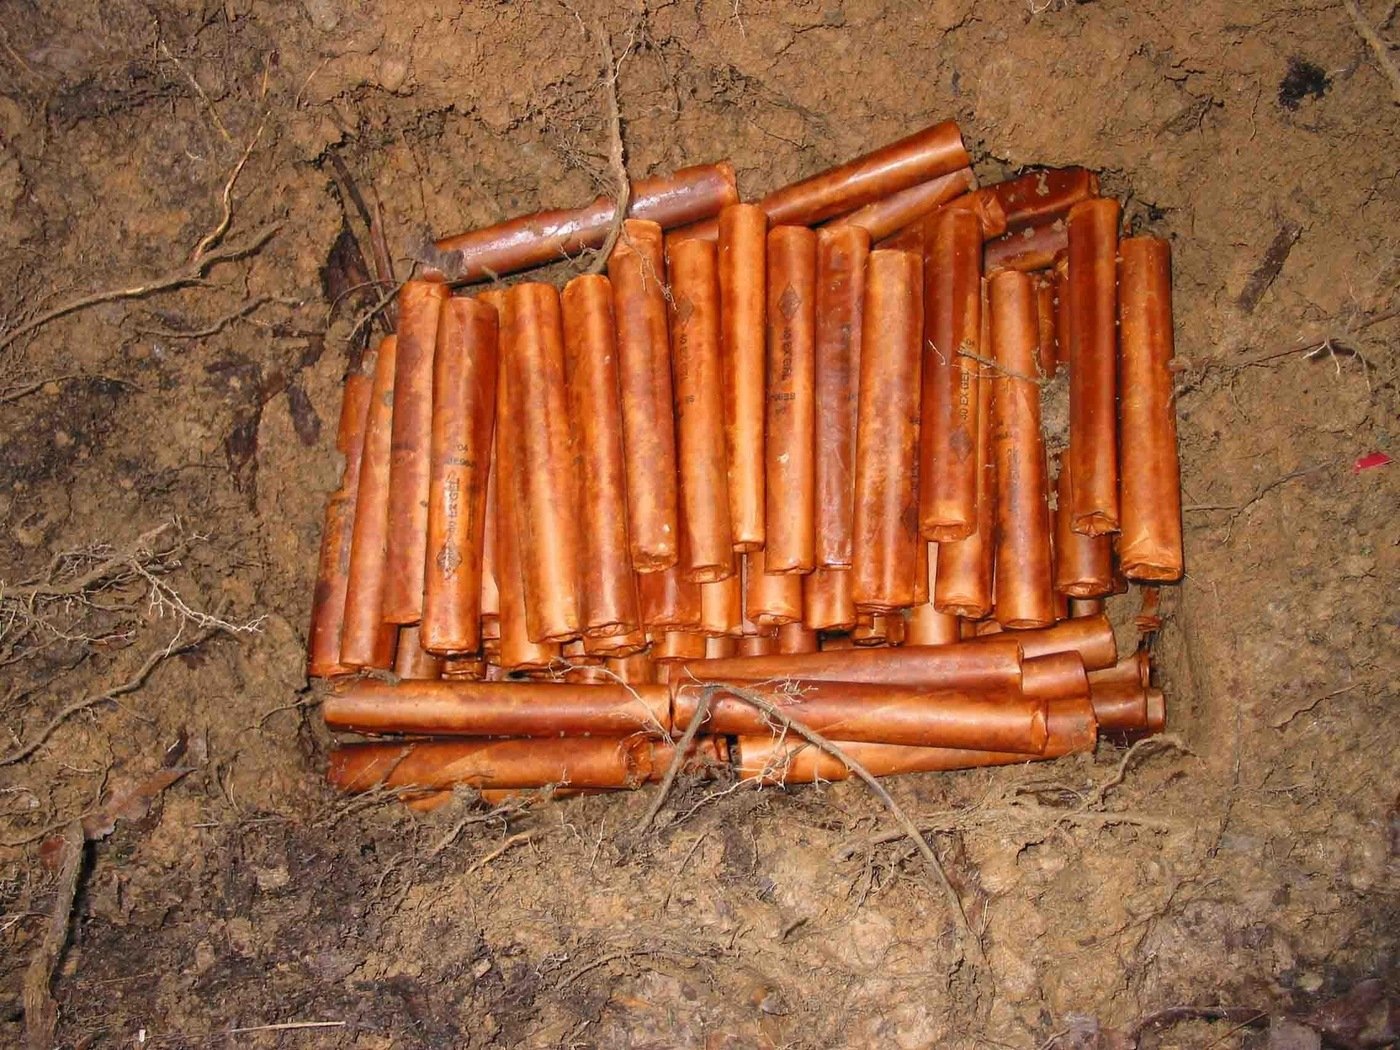 Some of the nitroglycerin dynamite hidden by fugitive Eric Rudolph and recovered by the FBI and other authorities in April 2005. Also located were fully and partially constructed bombs and remote control detonators. Rudolph, who exploded bombs at the Atlanta Olympics and other locations from 1996 to 1998, was captured by a police officer on May 31, 2003.